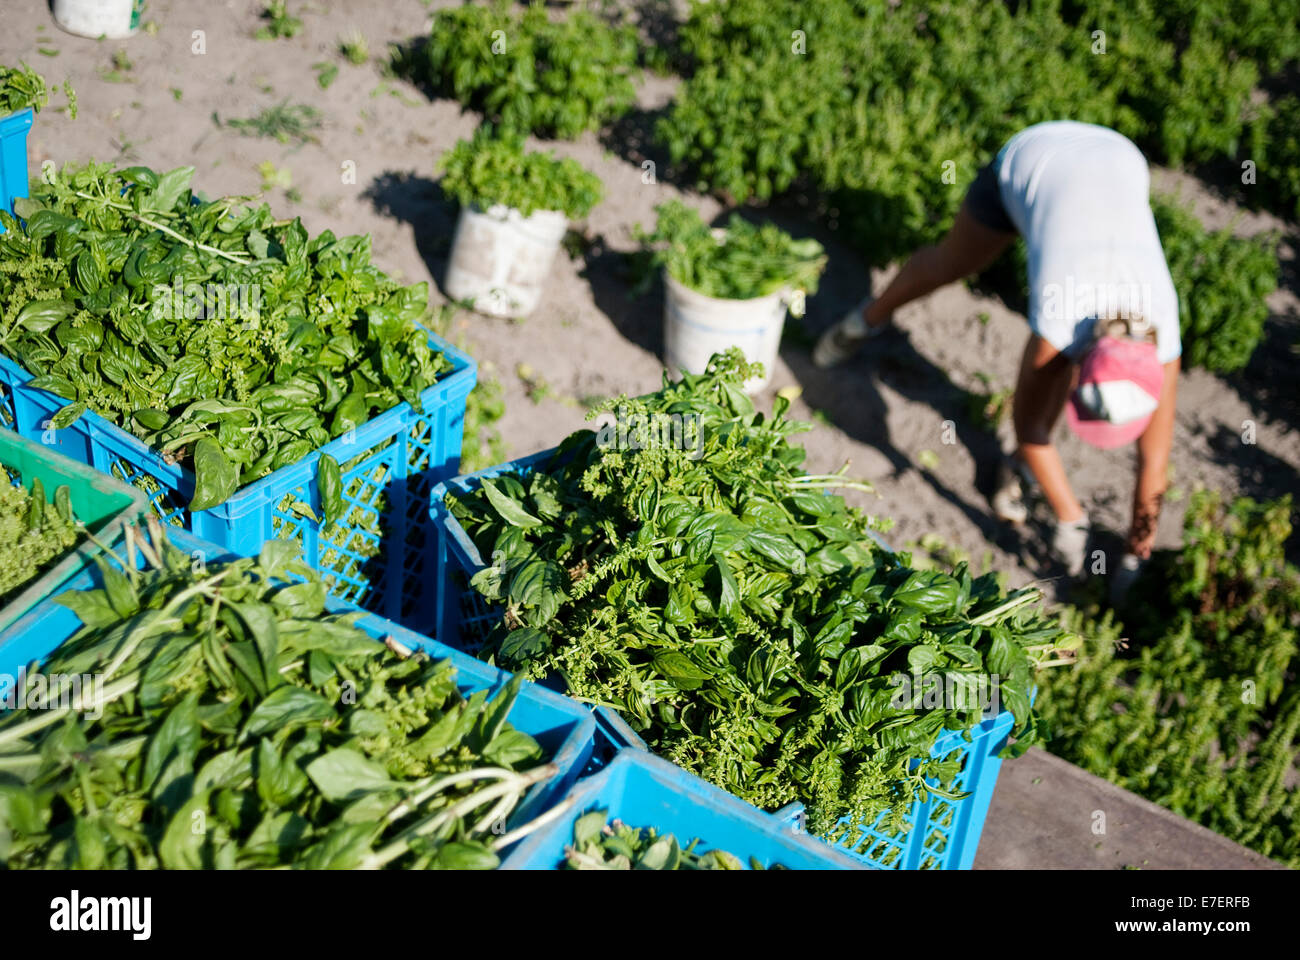 Young female farmer working on organic basil fields. Baskets full of fresh, organic basil in foreground. Stock Photo